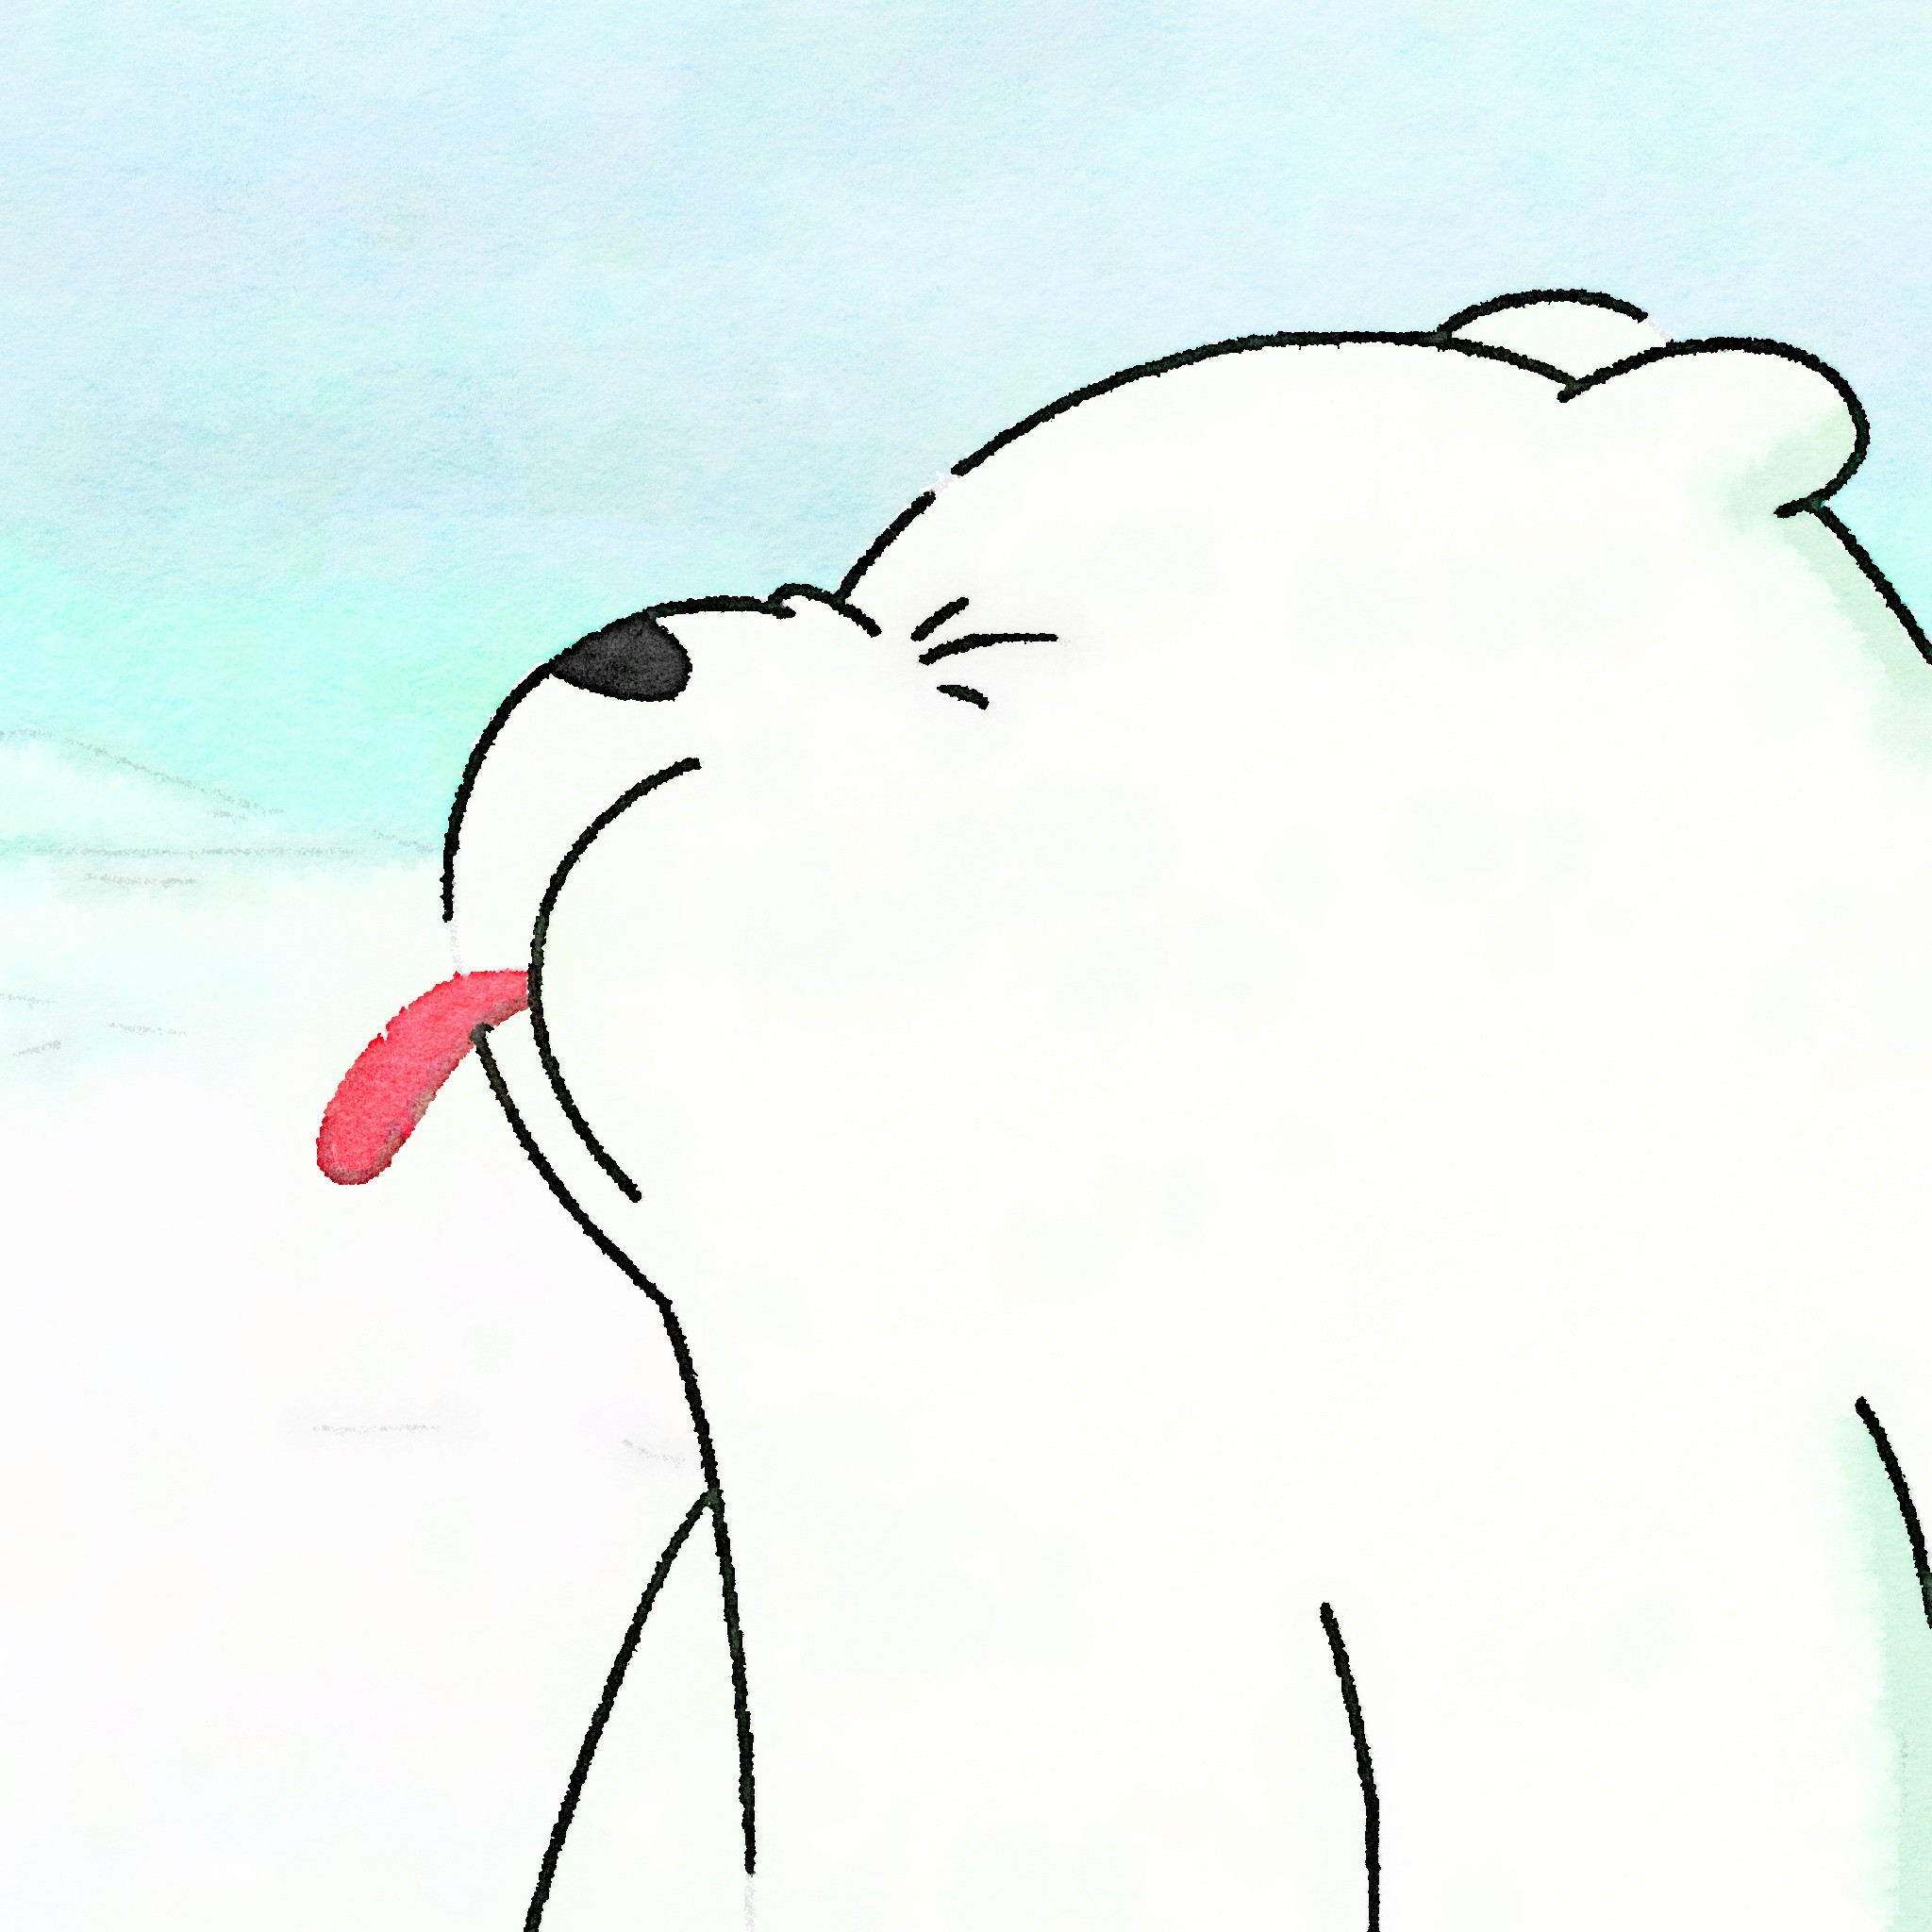 Cute wallpapers  ice bear wallpapers Requested by  Facebook